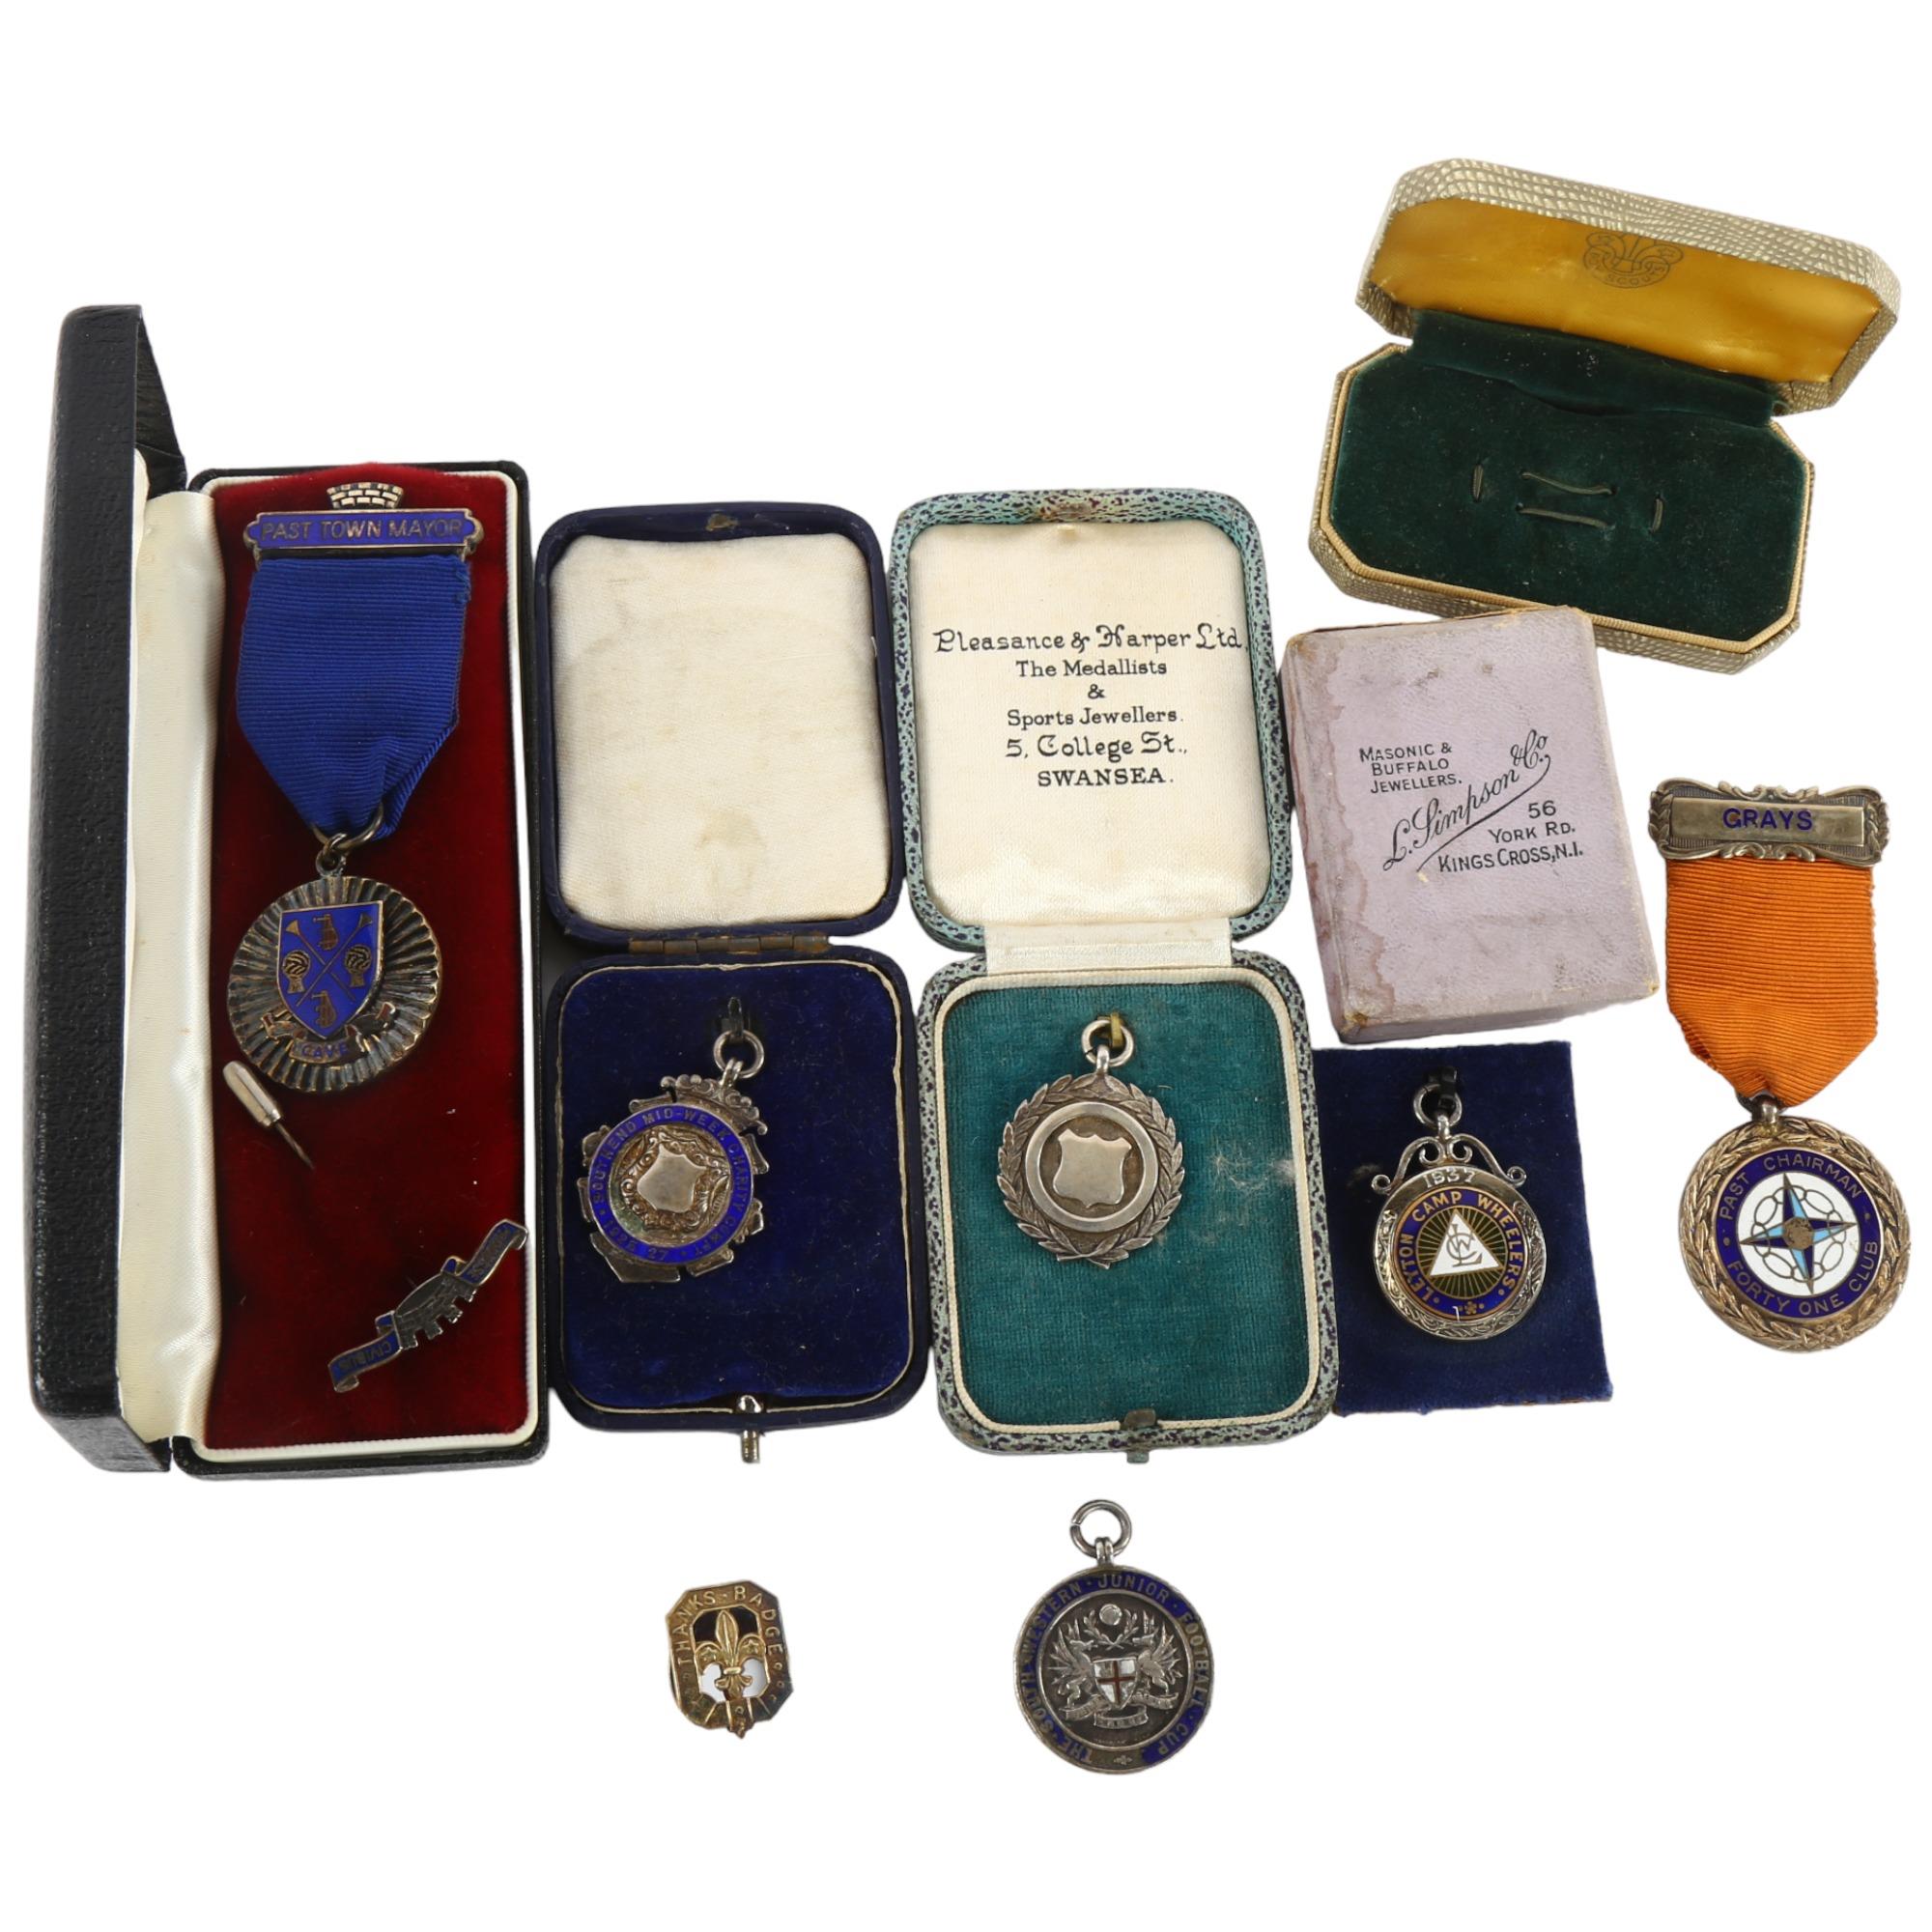 A collection of 8 silver medals and awards, including scouting and sporting interest